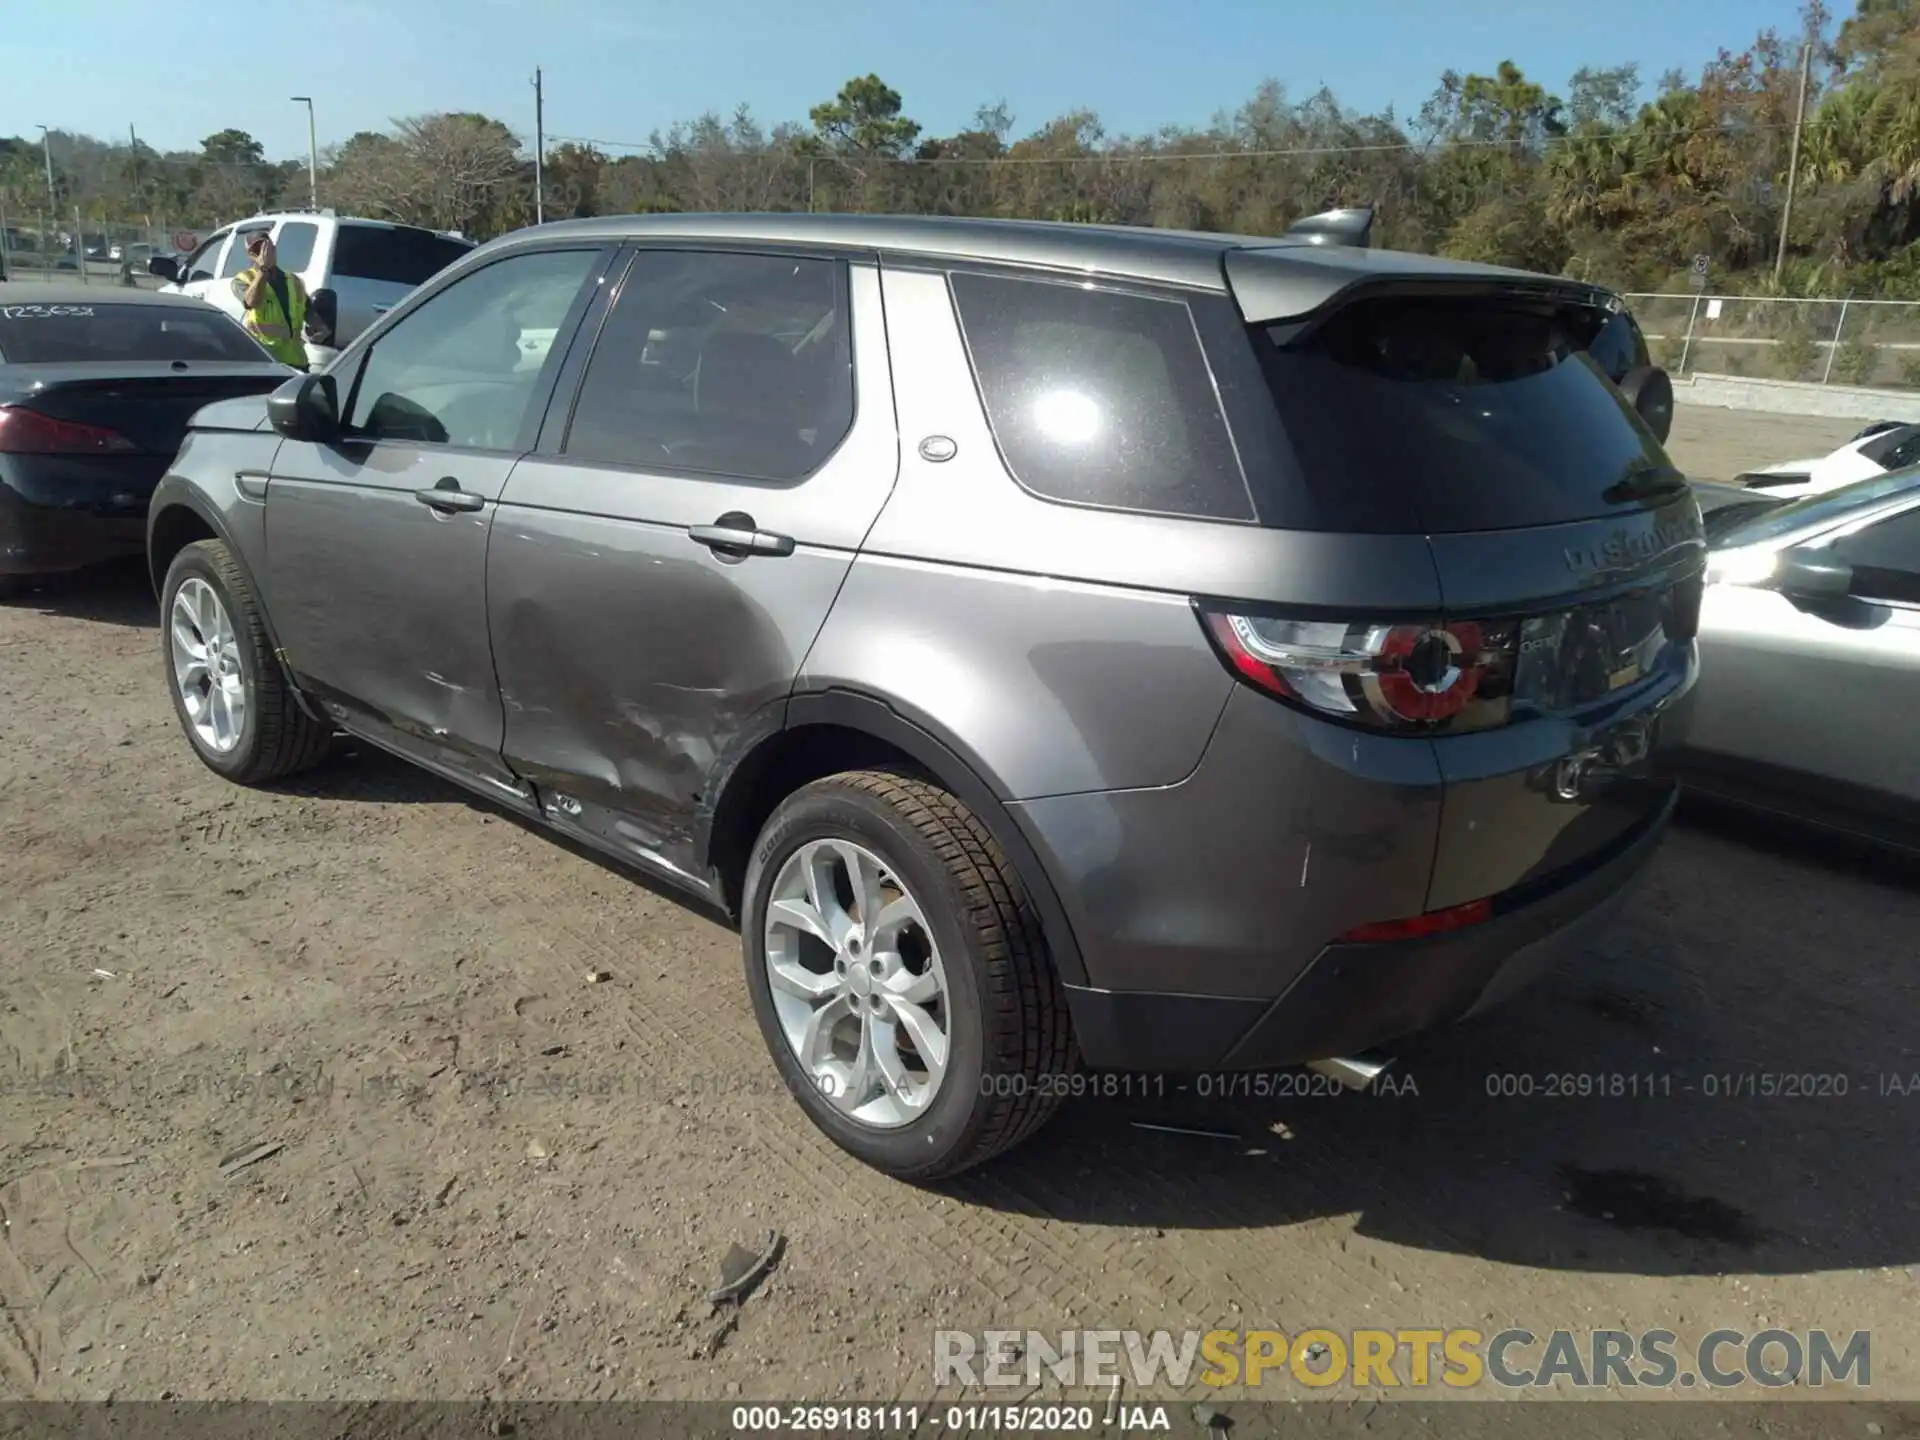 3 Photograph of a damaged car SALCP2FX3KH809644 LAND ROVER DISCOVERY SPORT 2019